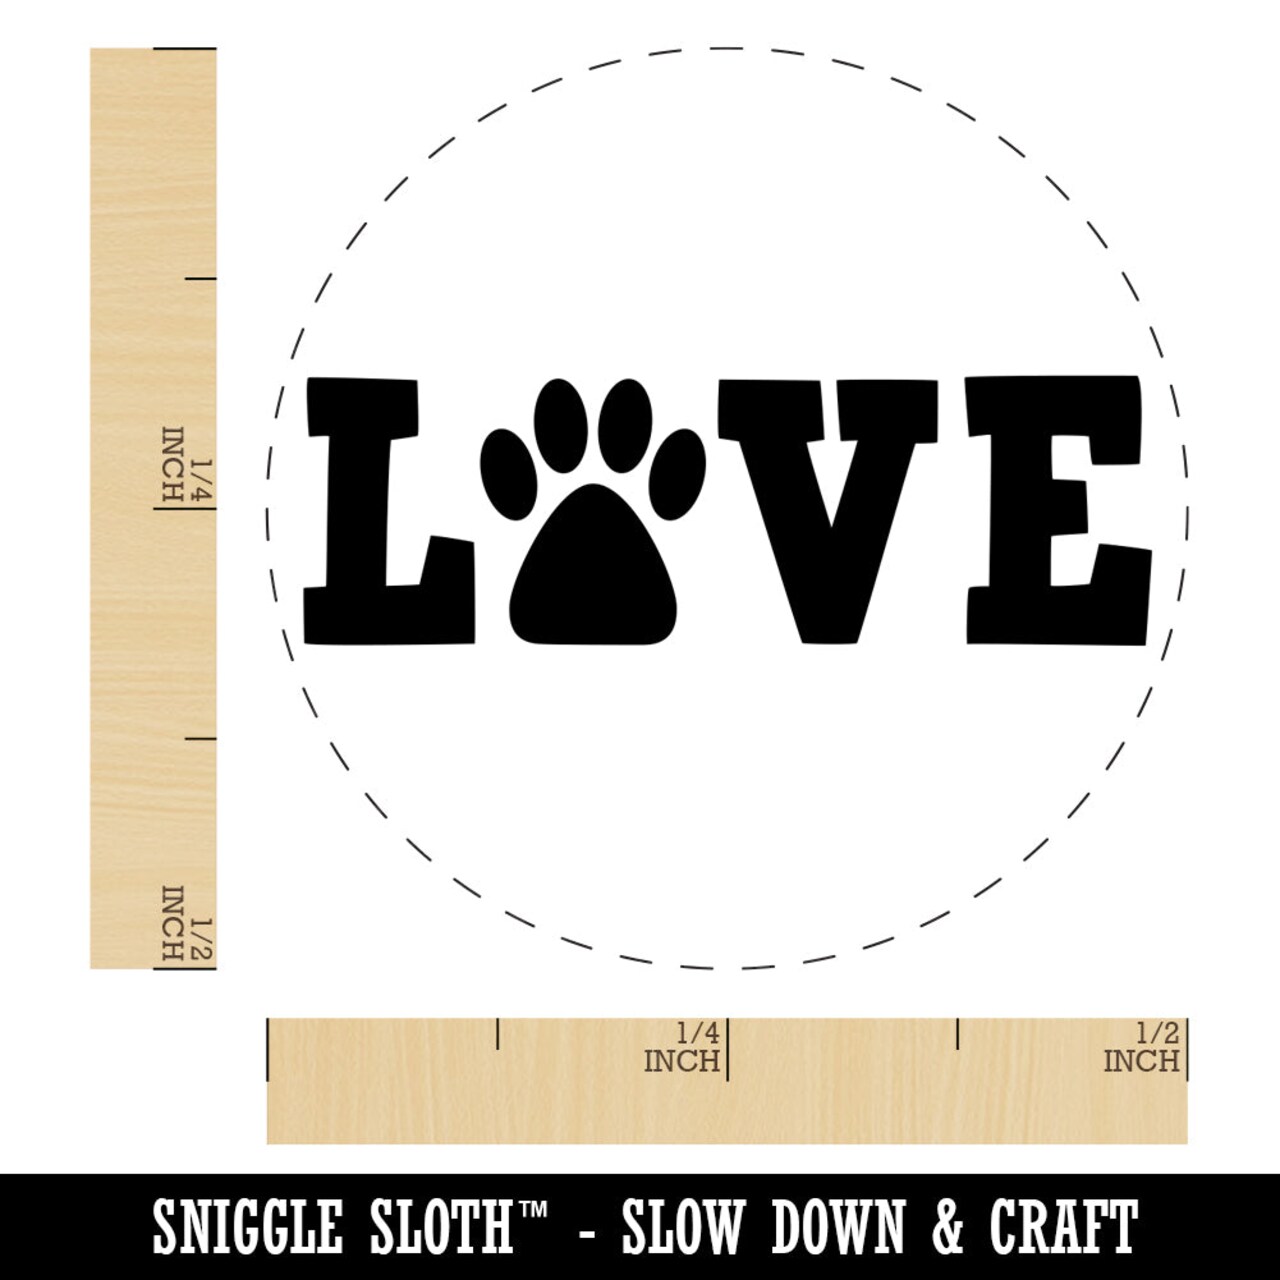 Love Paw Print Dog Cat Pet Text Self-Inking Rubber Stamp for Stamping Crafting Planners